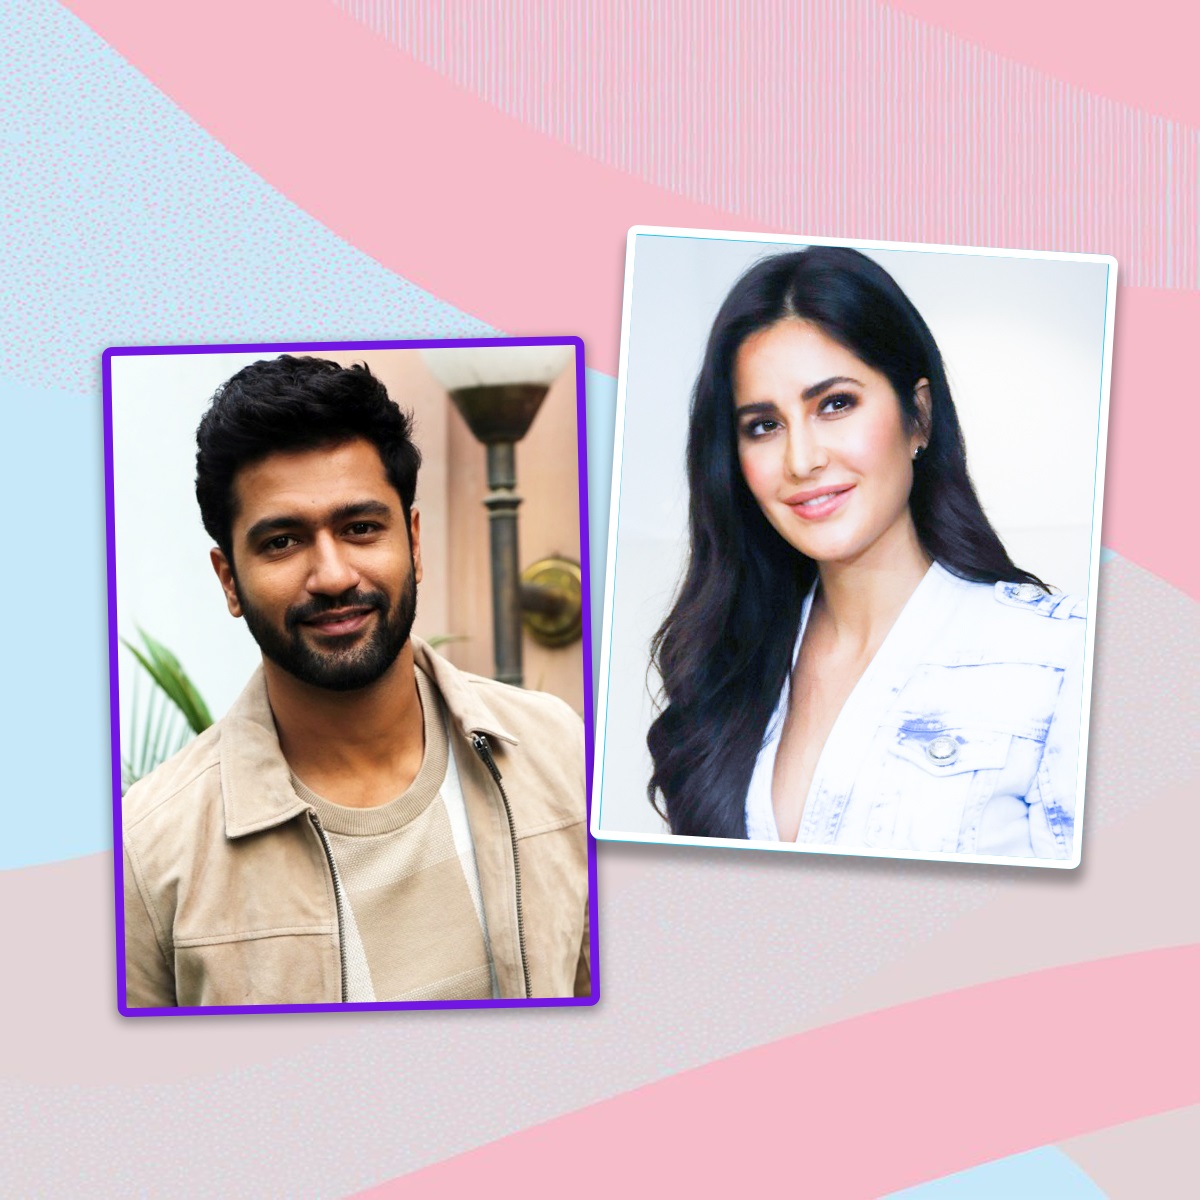 EXCLUSIVE: FIRST wedding guest confirmed at Vicky Kaushal & Katrina Kaif's Udaipur shaadi